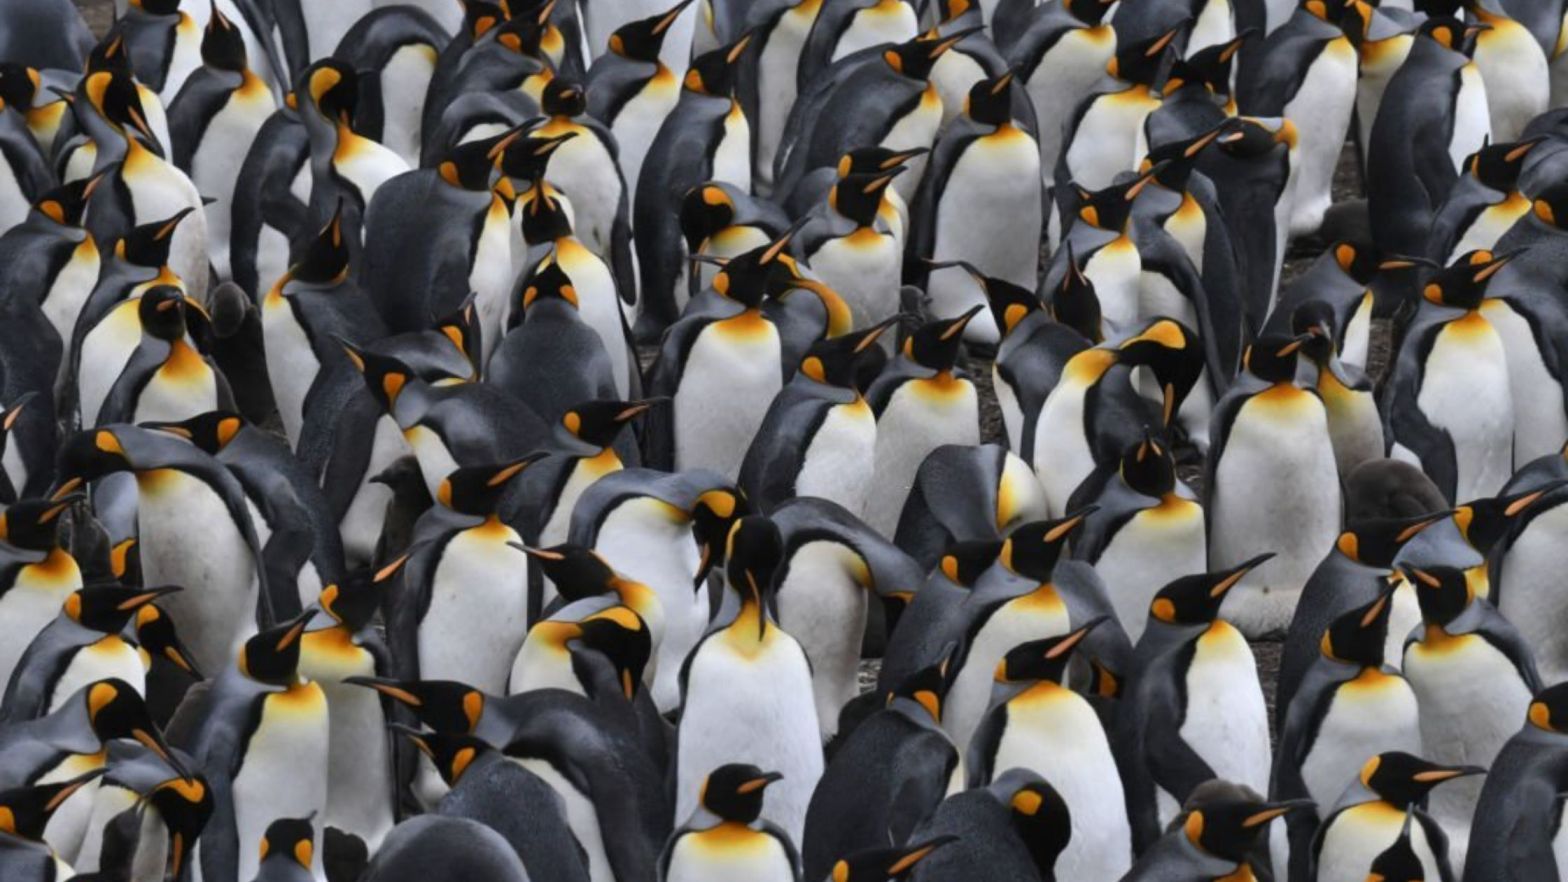 What is a Group of Penguins Called